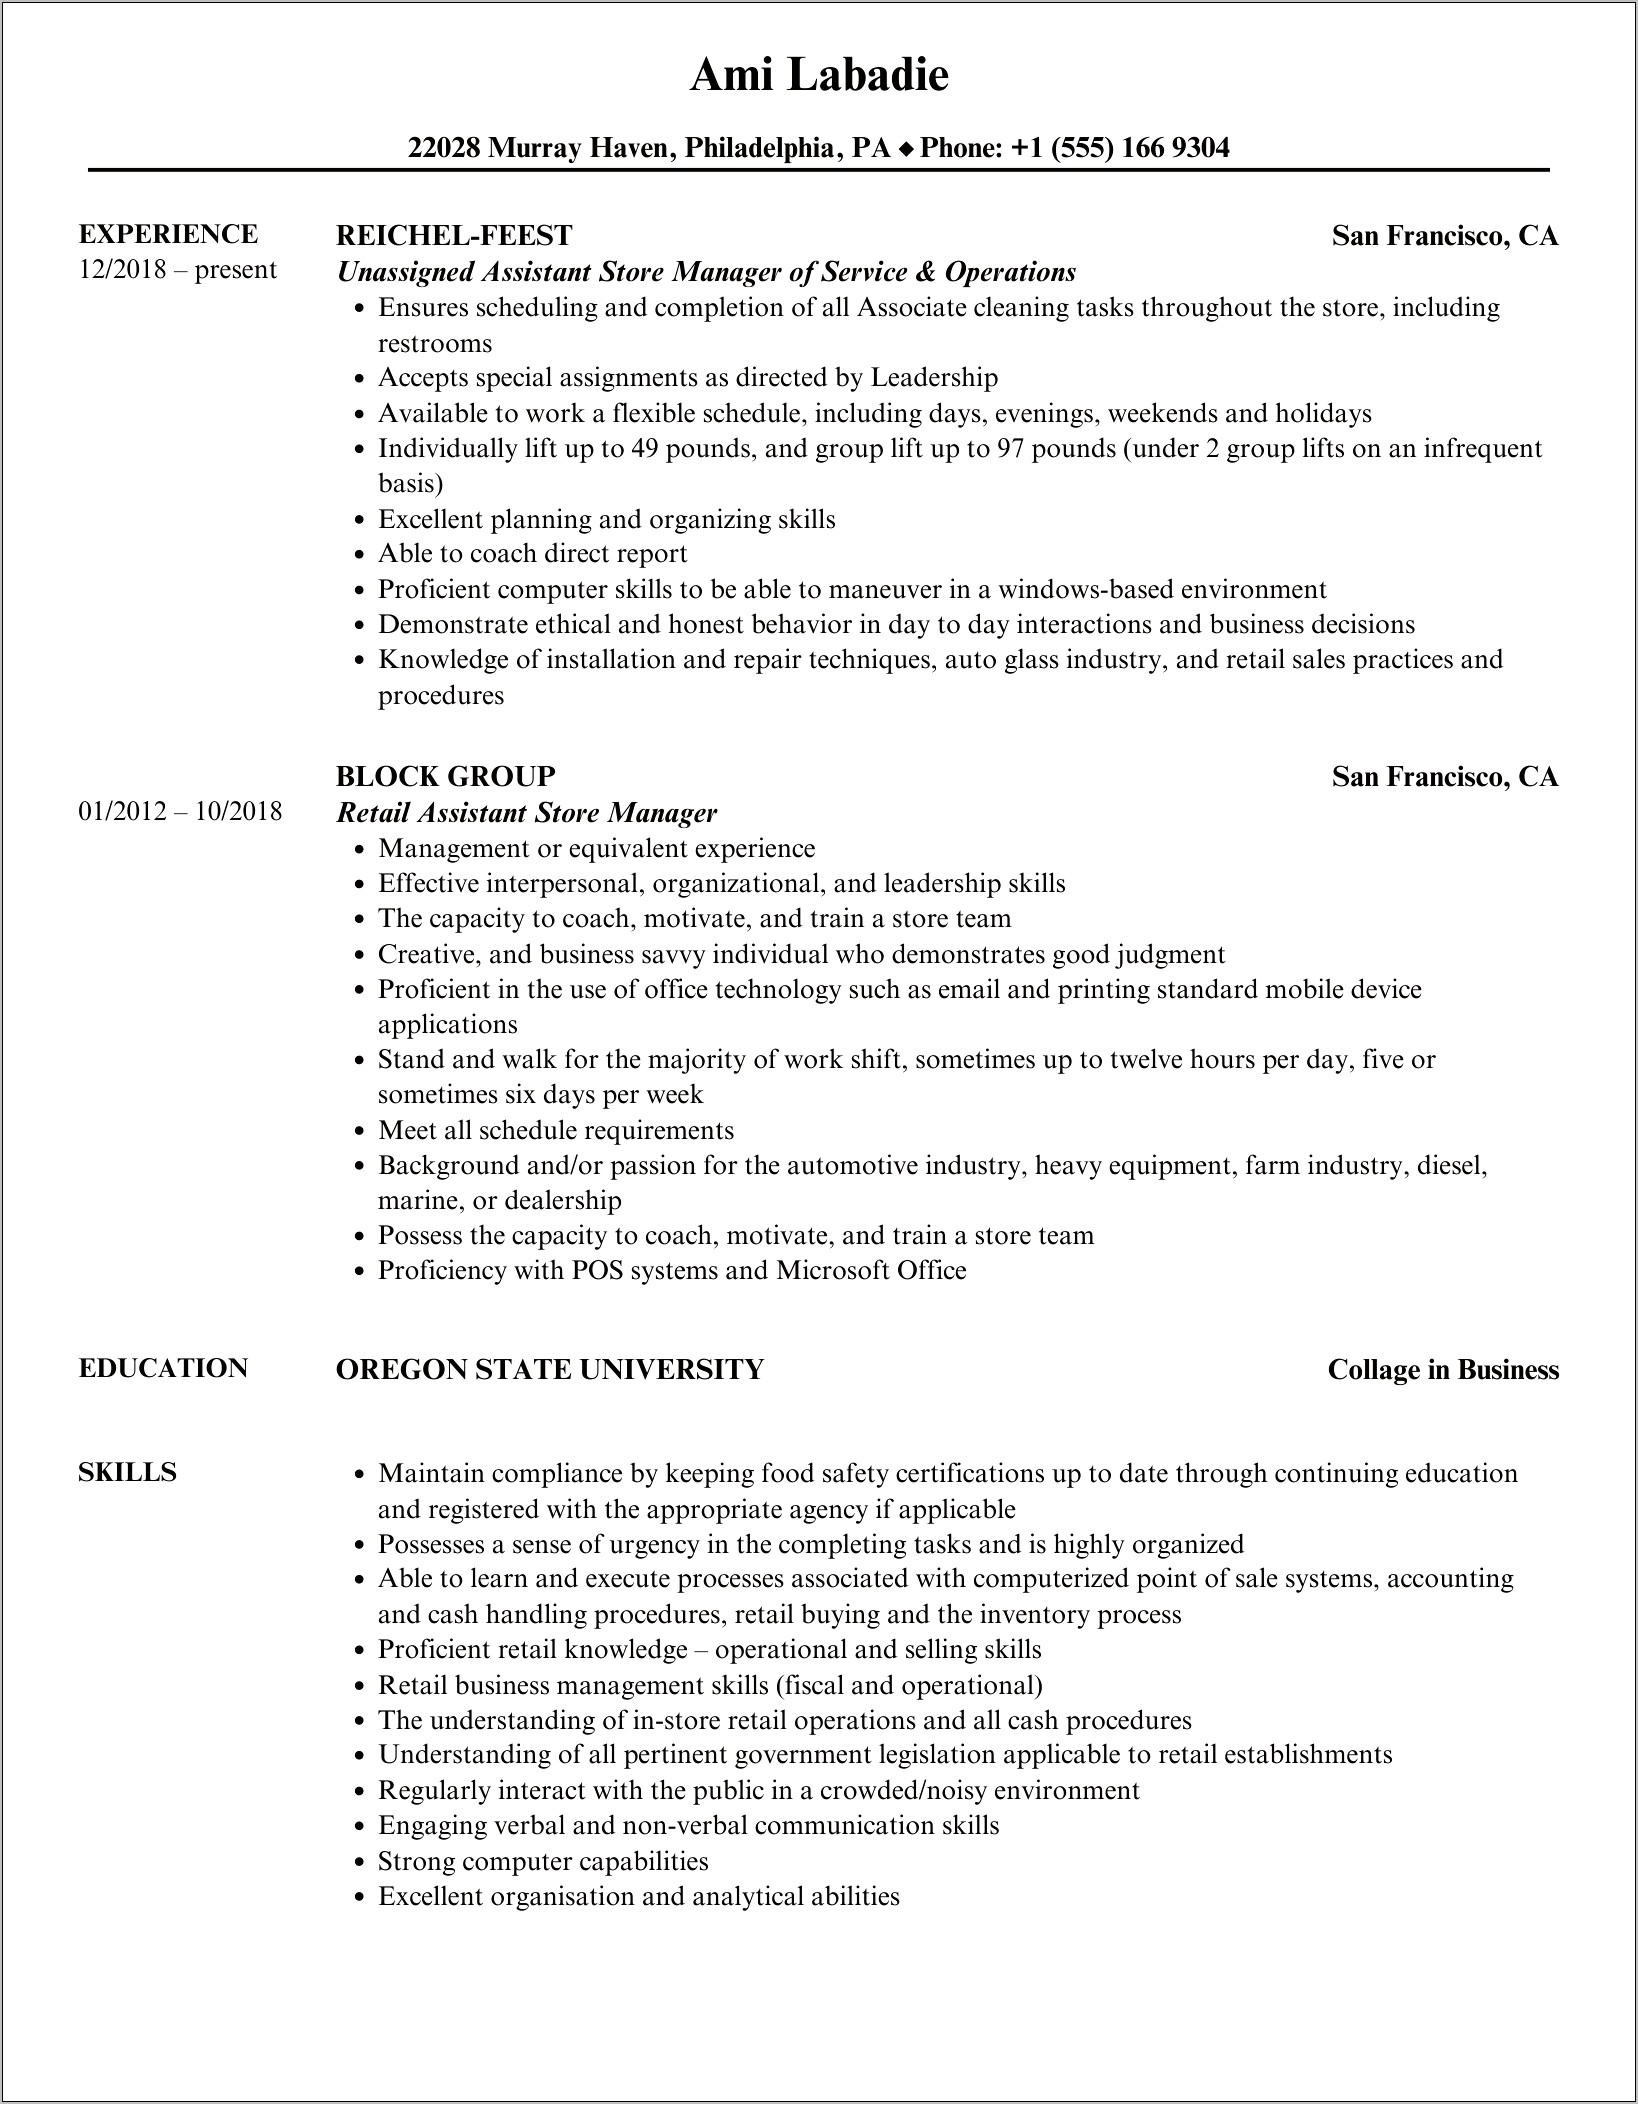 Walgreens Assistant Store Manager Resume